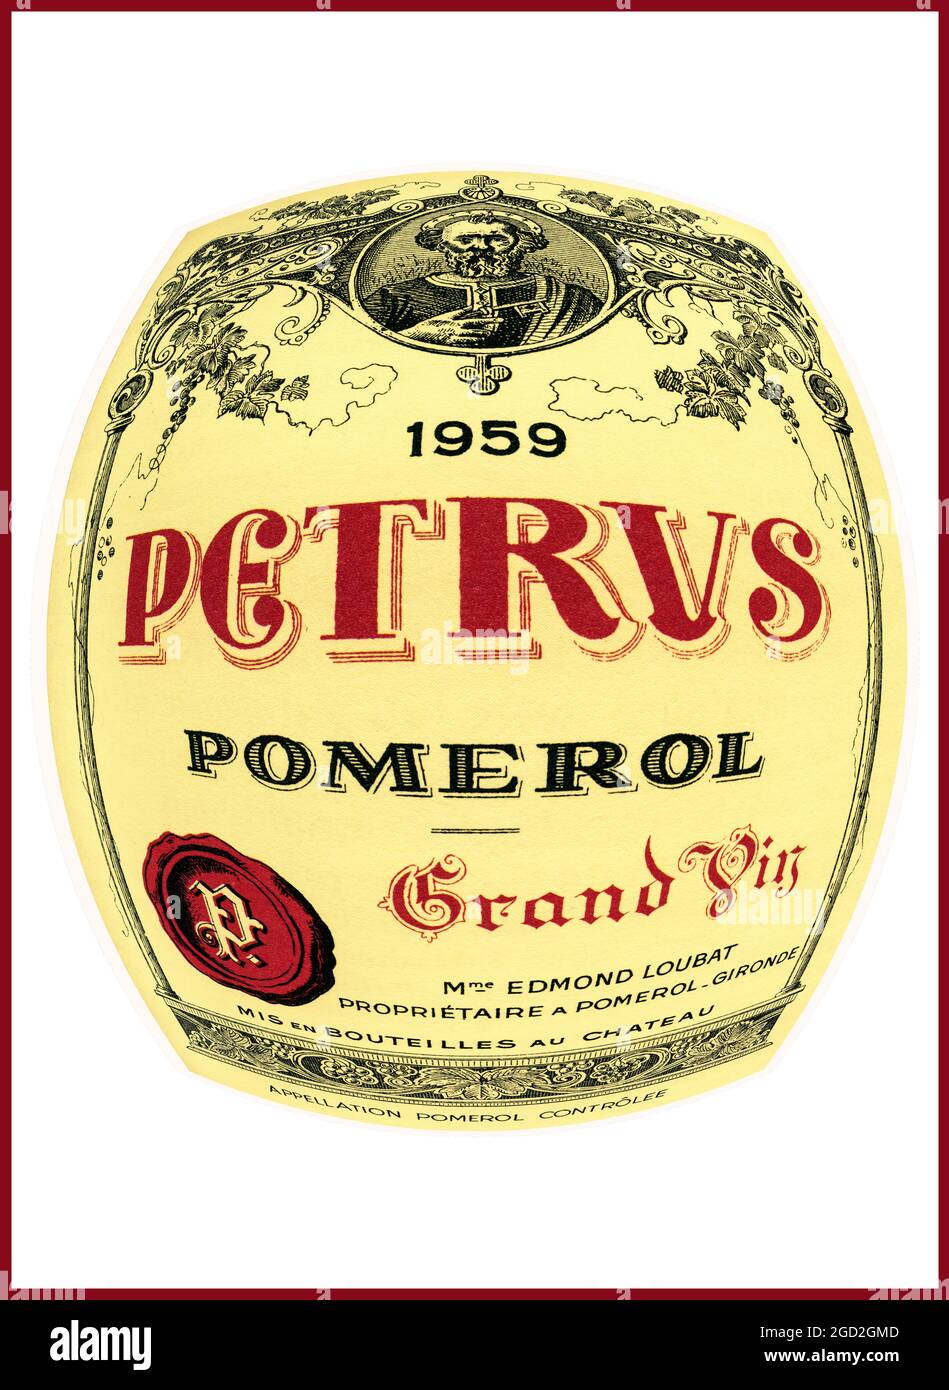 PETRUS Concept Bottle label of outstanding year 1959 Chateau Petrus Pomerol Grand Vin red wine Bordeaux France Stock Photo